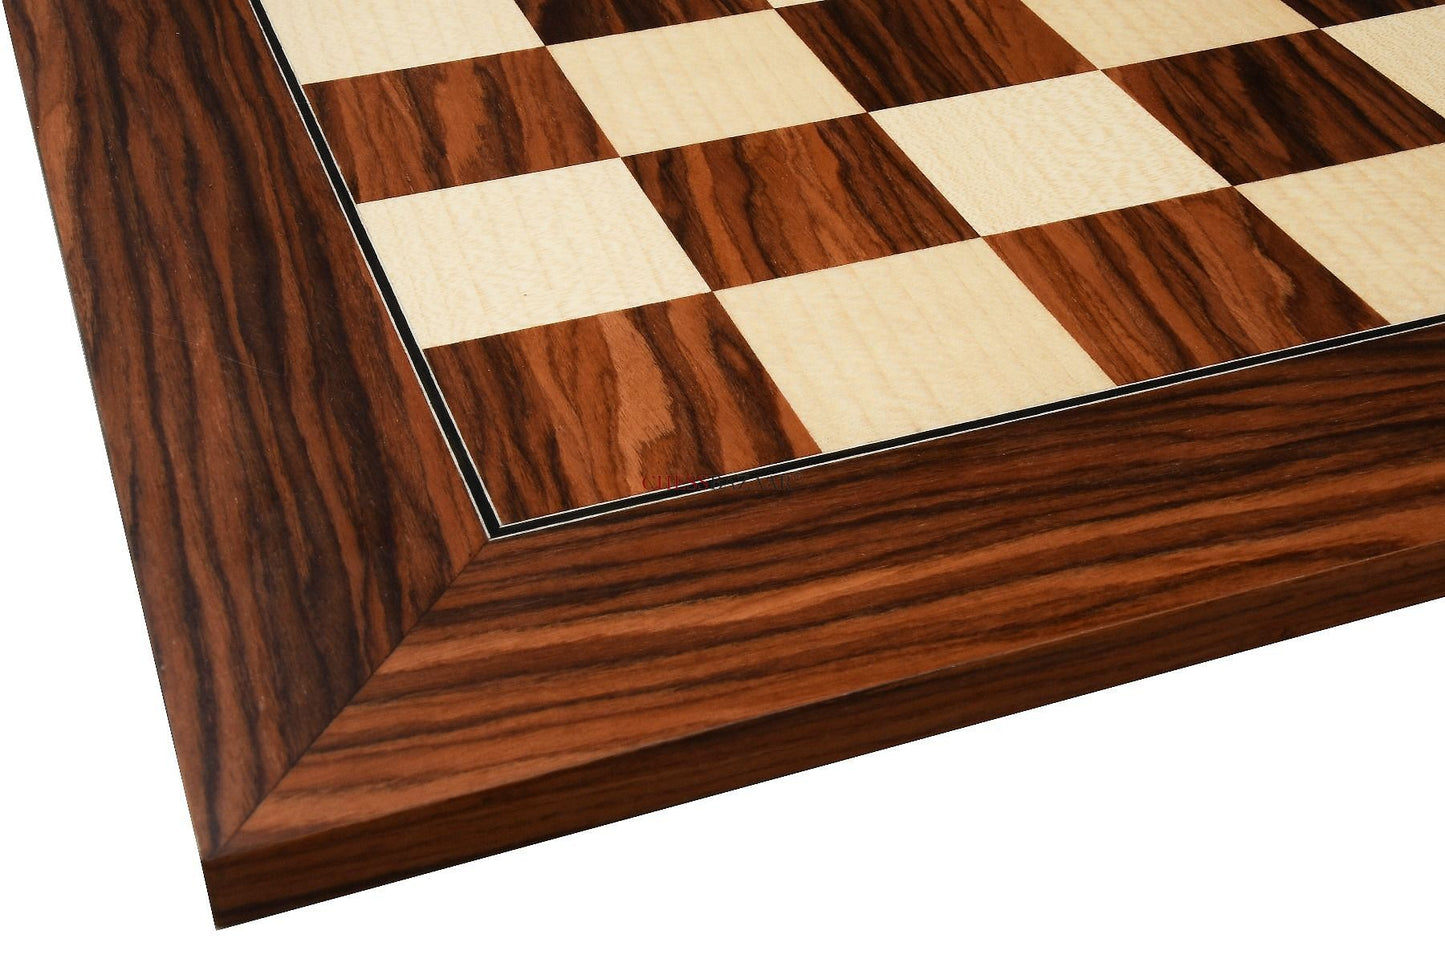 Wooden Deluxe Santos Palisander pr & Sycamore with Matte Finish Chess Board 22" - 55 mm